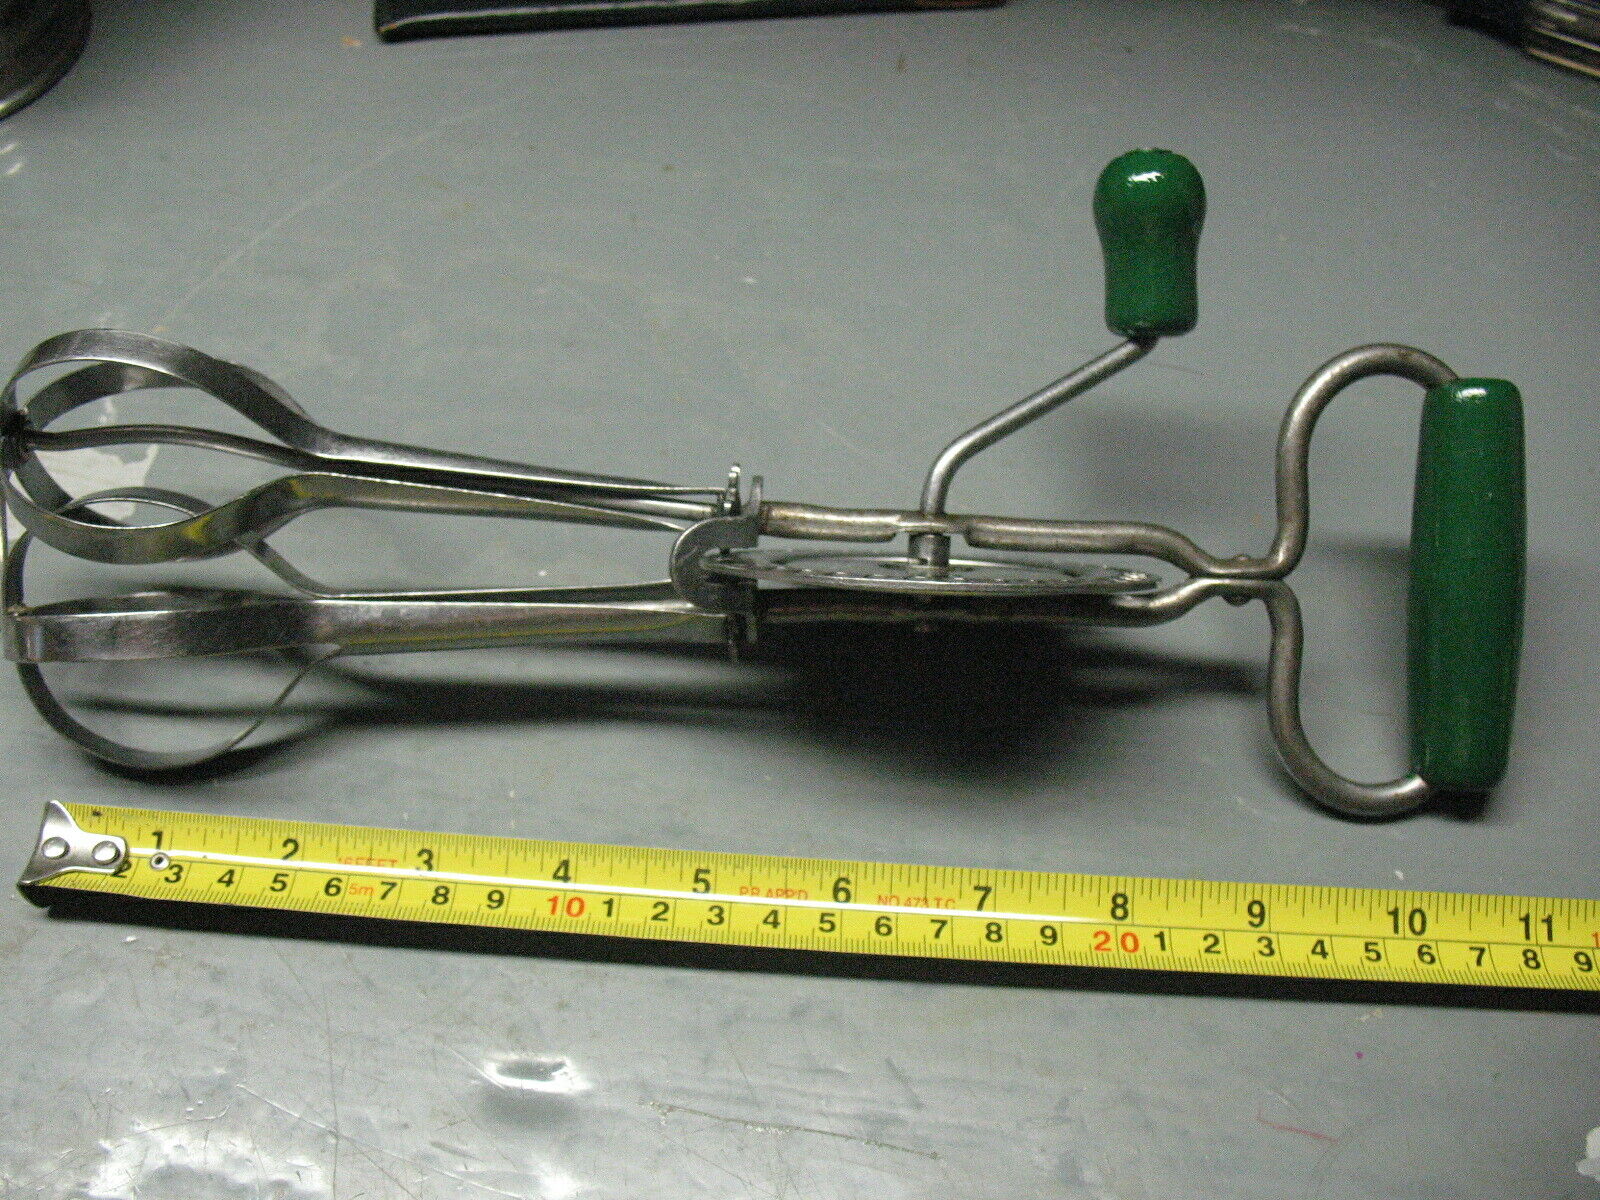 EDLUND  CO.  STAINLESS   STEAL  HAND  CRANK  EGG   BEATER  PAT. PEND. USA SUPER 